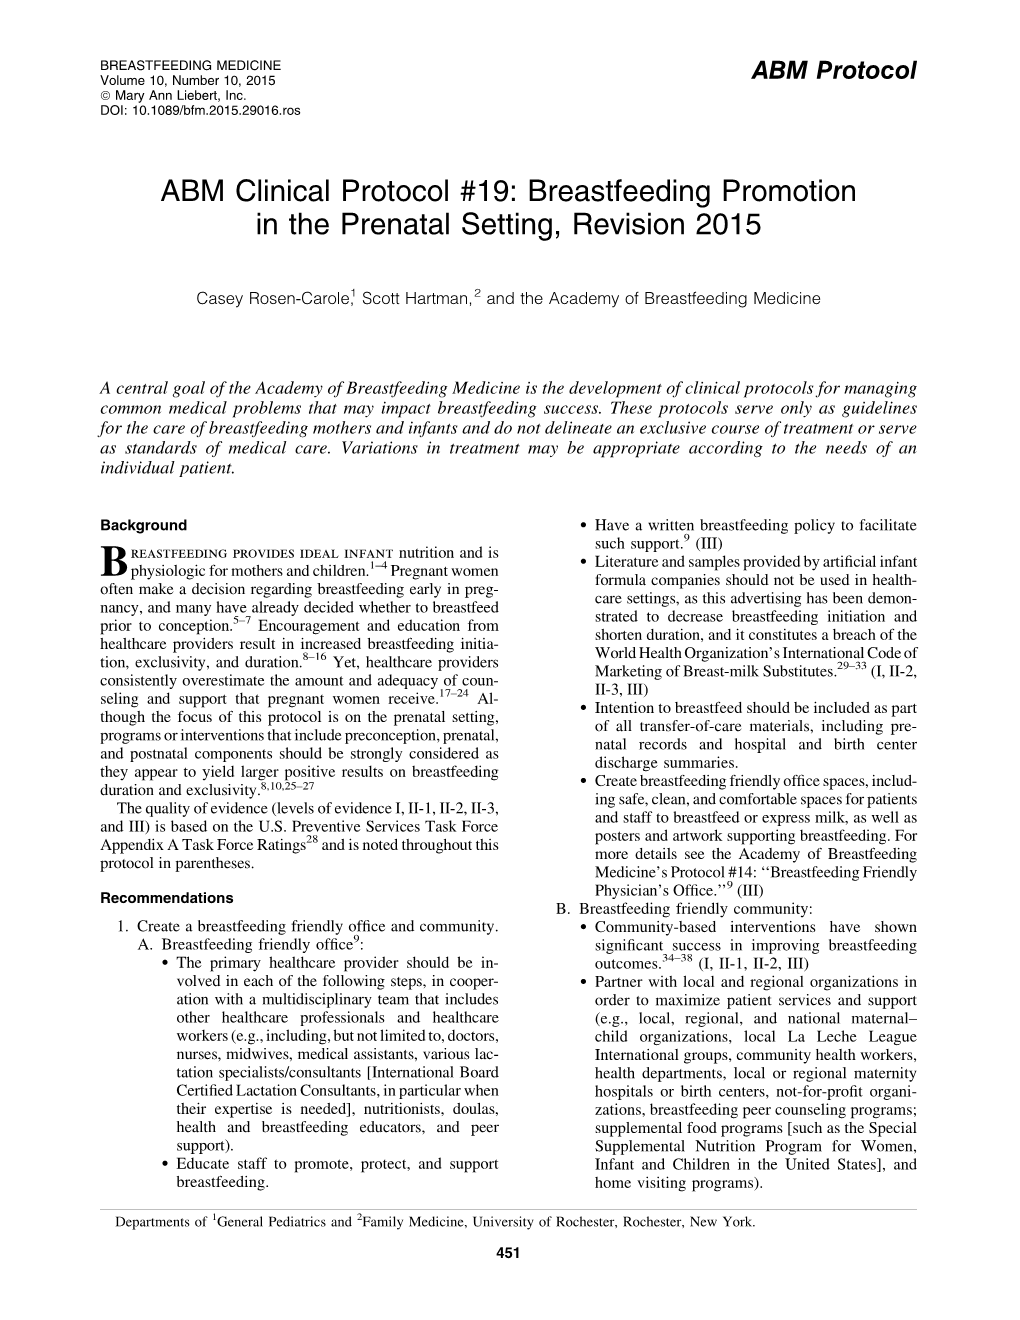 ABM Clinical Protocol #19: Breastfeeding Promotion in the Prenatal Setting, Revision 2015